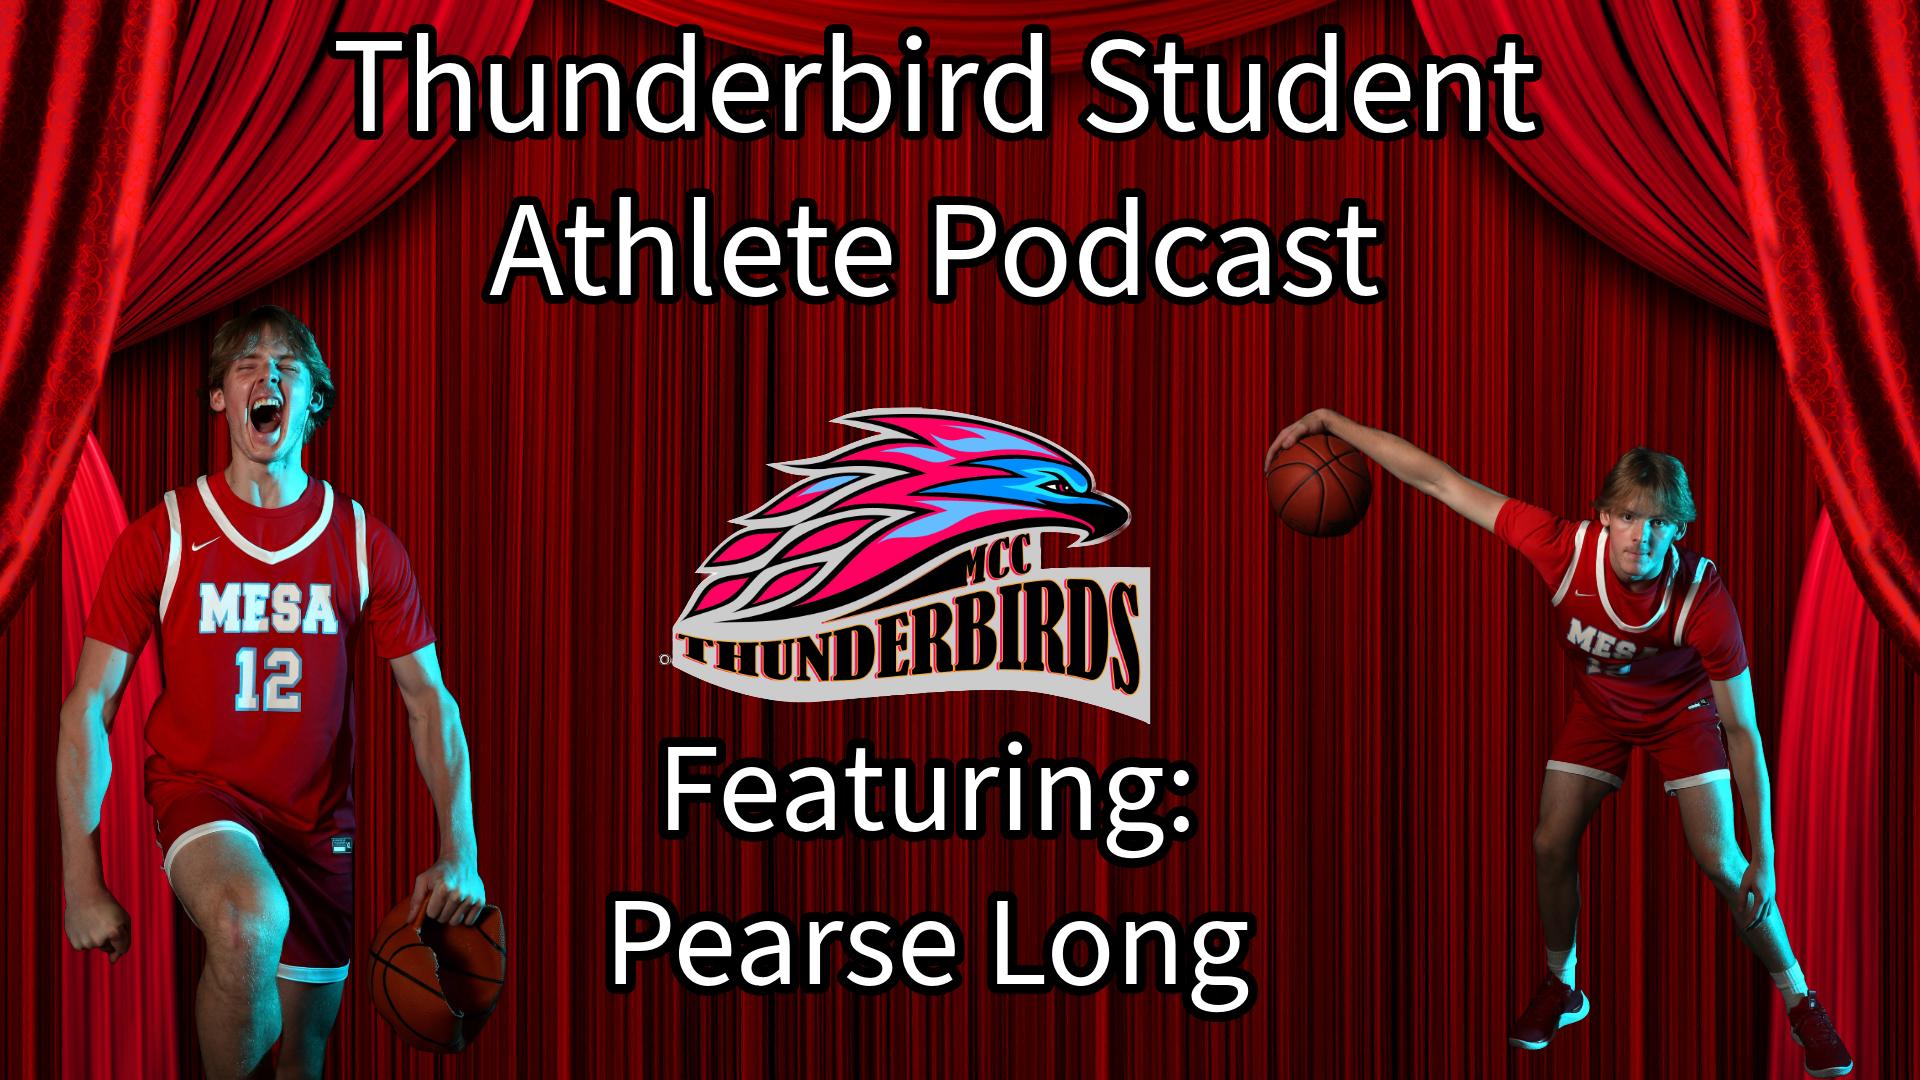 Thunderbird Student Athlete Podcast...Featuring Pearse Long